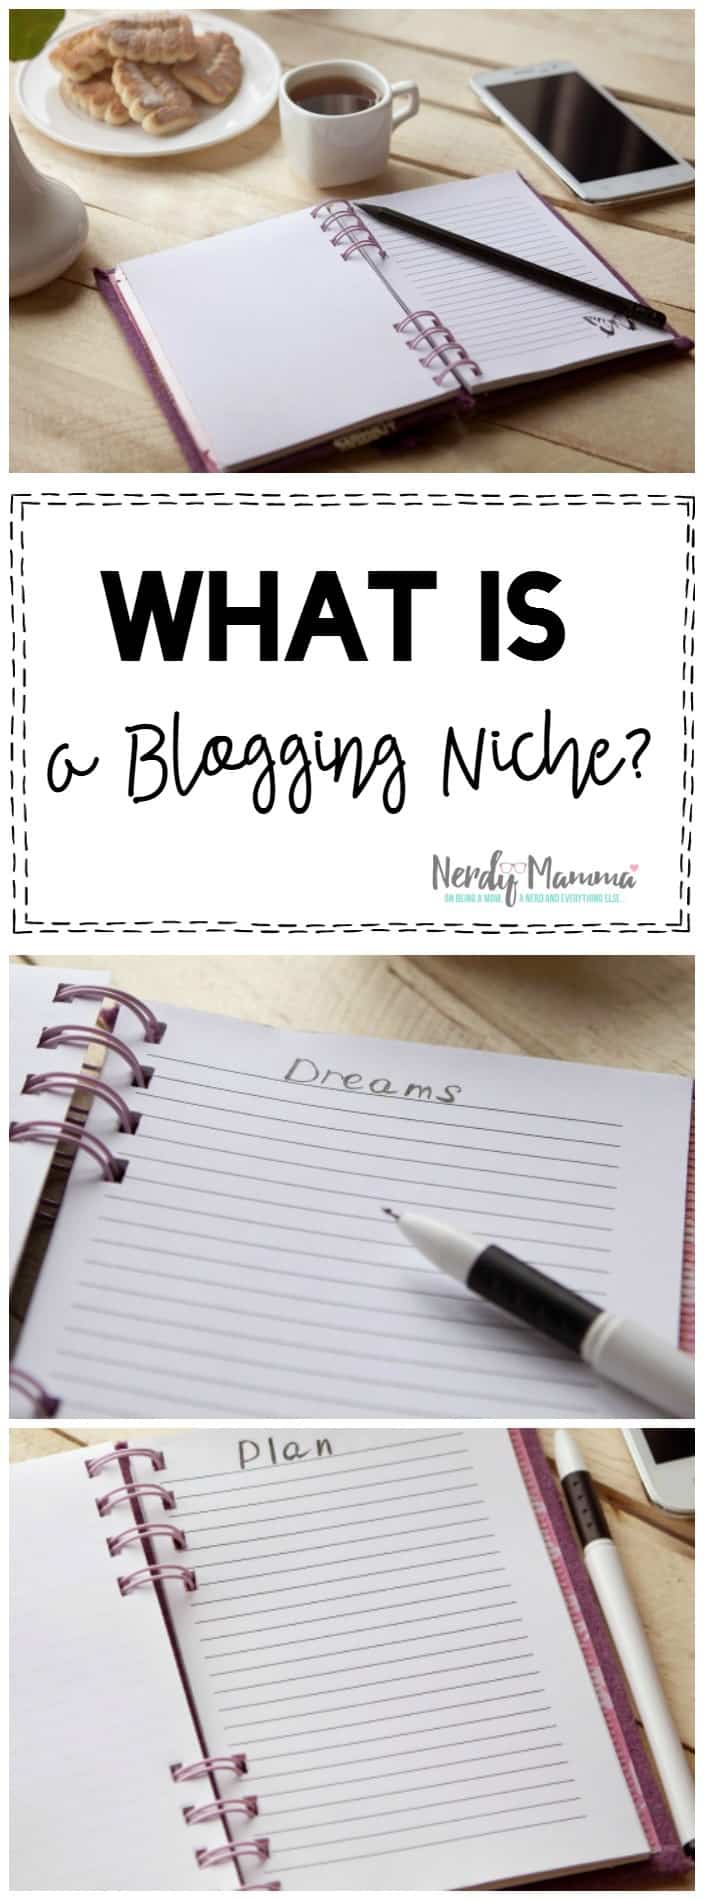 I keep hearing that you need to pick a niche when you start blogging. But what is a blogging niche anyway? This post really cleared that up for me.